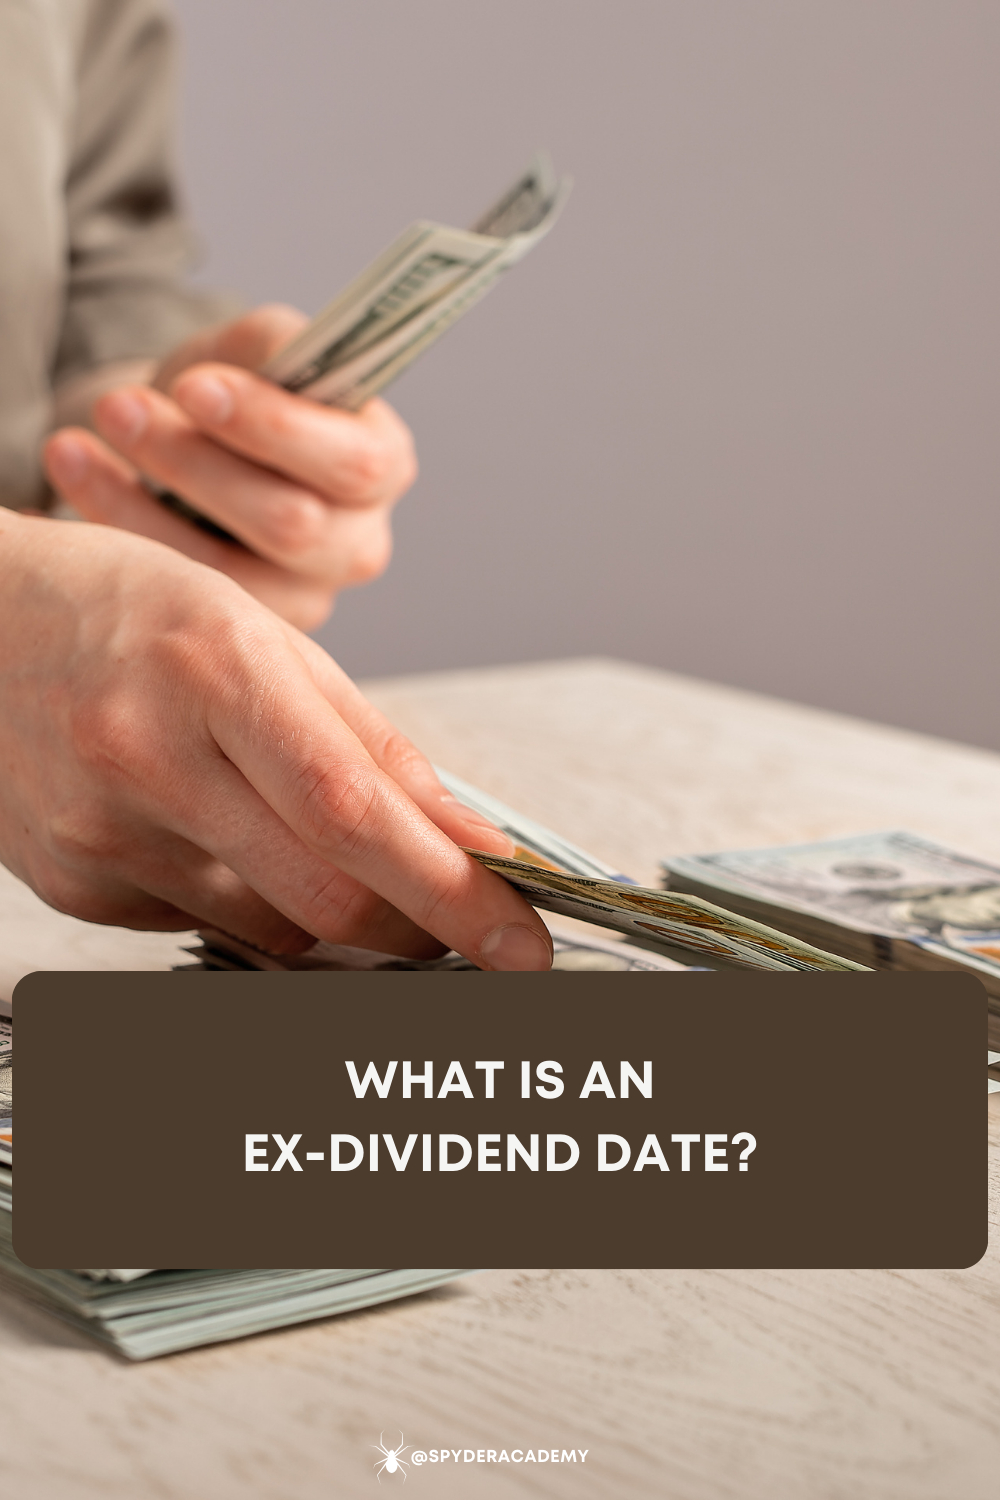 The Ex-Dividend Date is a pivotal moment in the dividend distribution process. On this date, a stock begins trading without the right to the upcoming dividend payment. Investors who purchase the stock on or after the ex-dividend date won't receive the dividend.